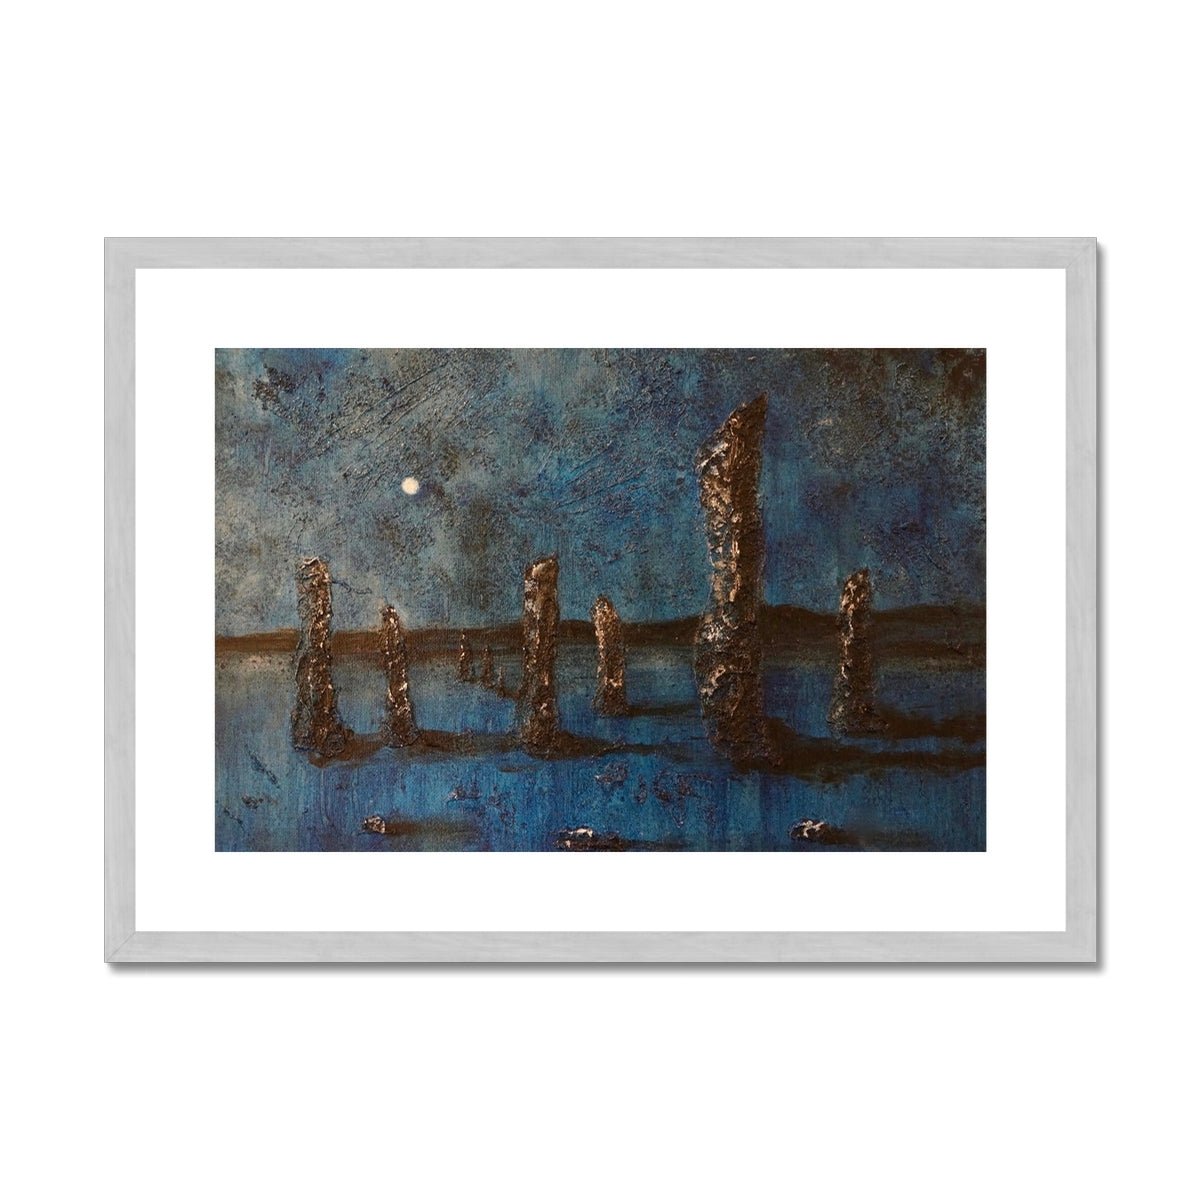 Callanish Moonlight Lewis Painting | Antique Framed & Mounted Prints From Scotland-Antique Framed & Mounted Prints-Hebridean Islands Art Gallery-A2 Landscape-Silver Frame-Paintings, Prints, Homeware, Art Gifts From Scotland By Scottish Artist Kevin Hunter